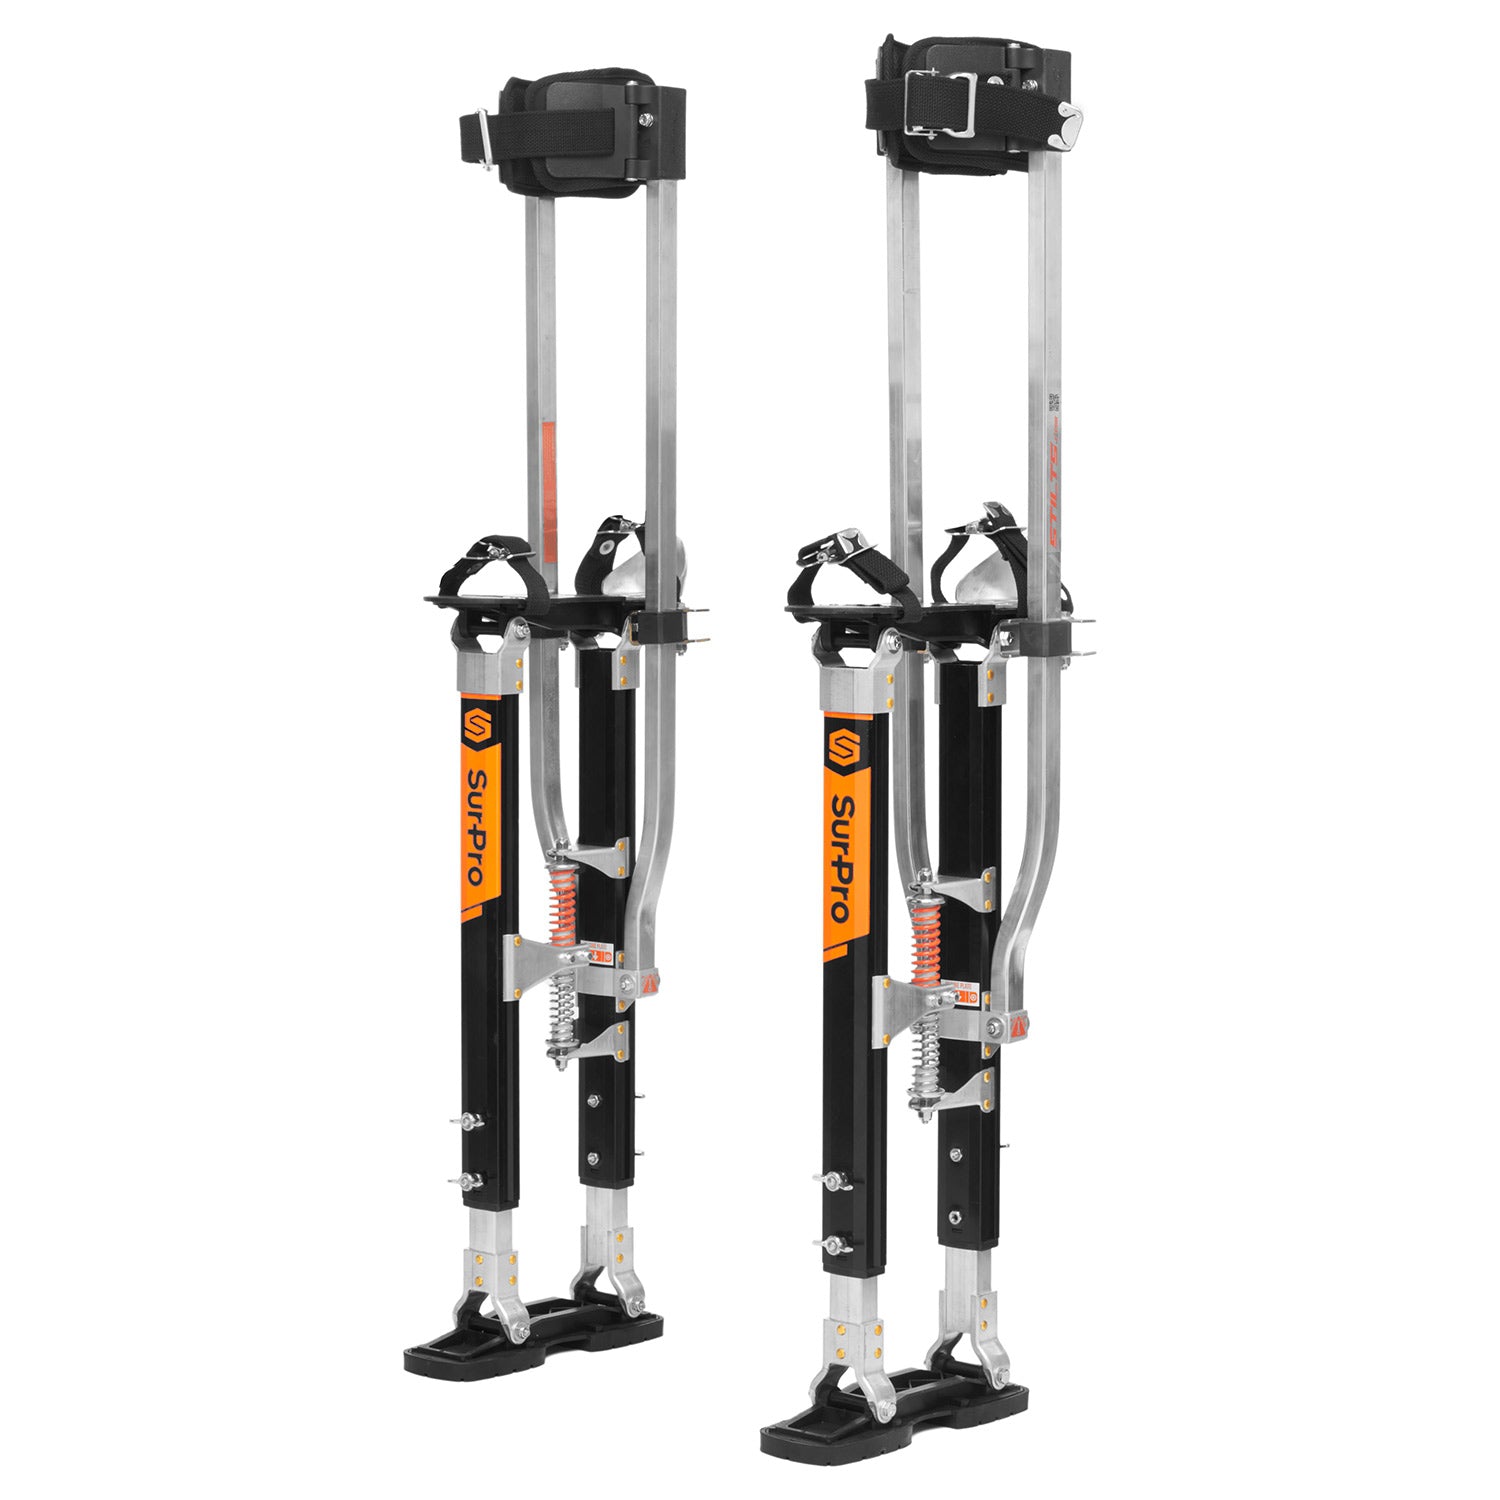 SurPro S2 Magnesium Stilts for drywall